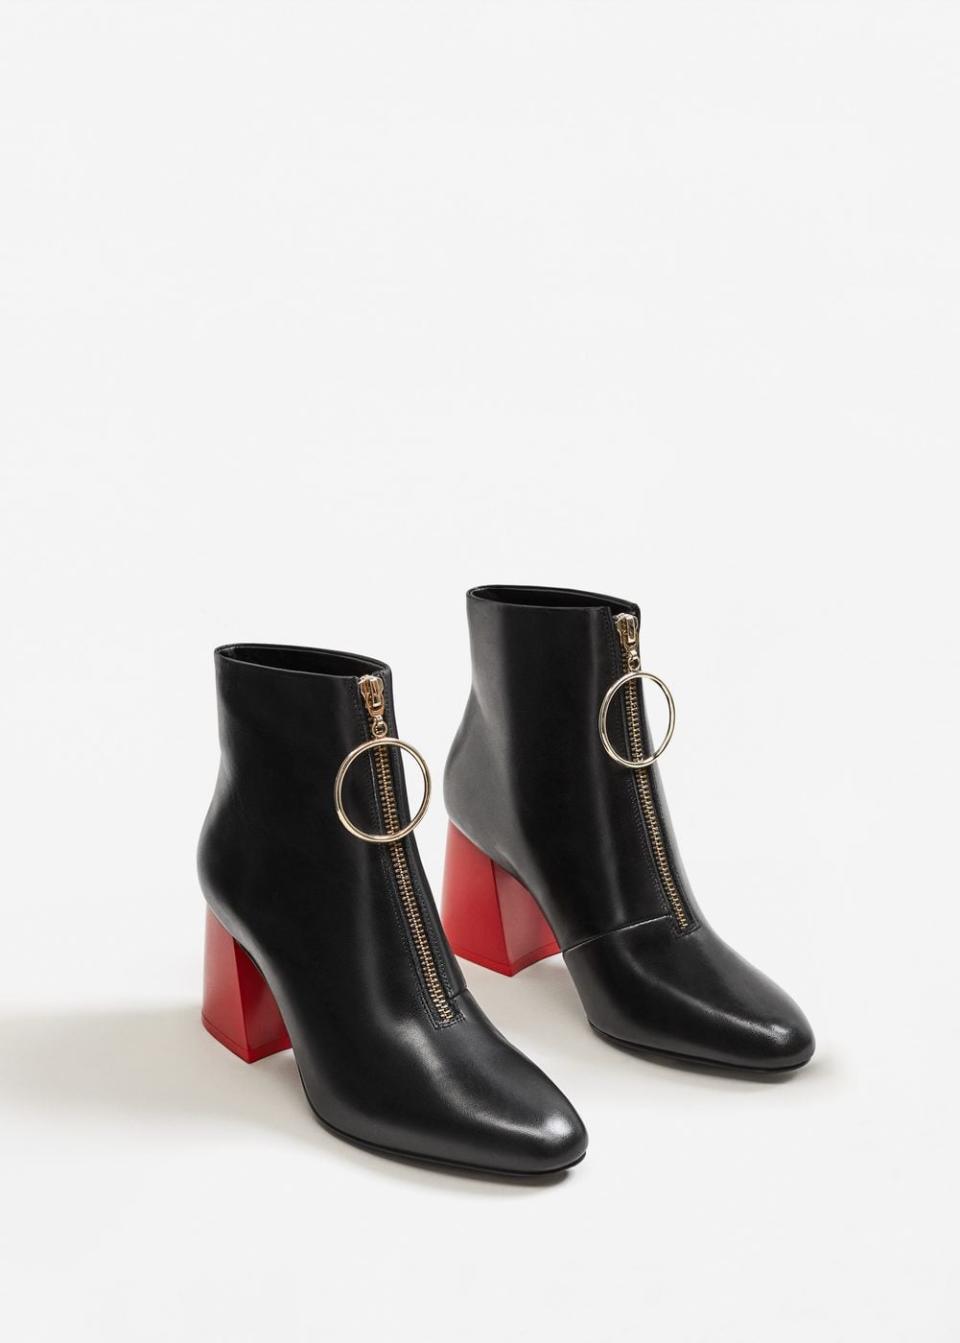 Bag this season’s most sought-after boots